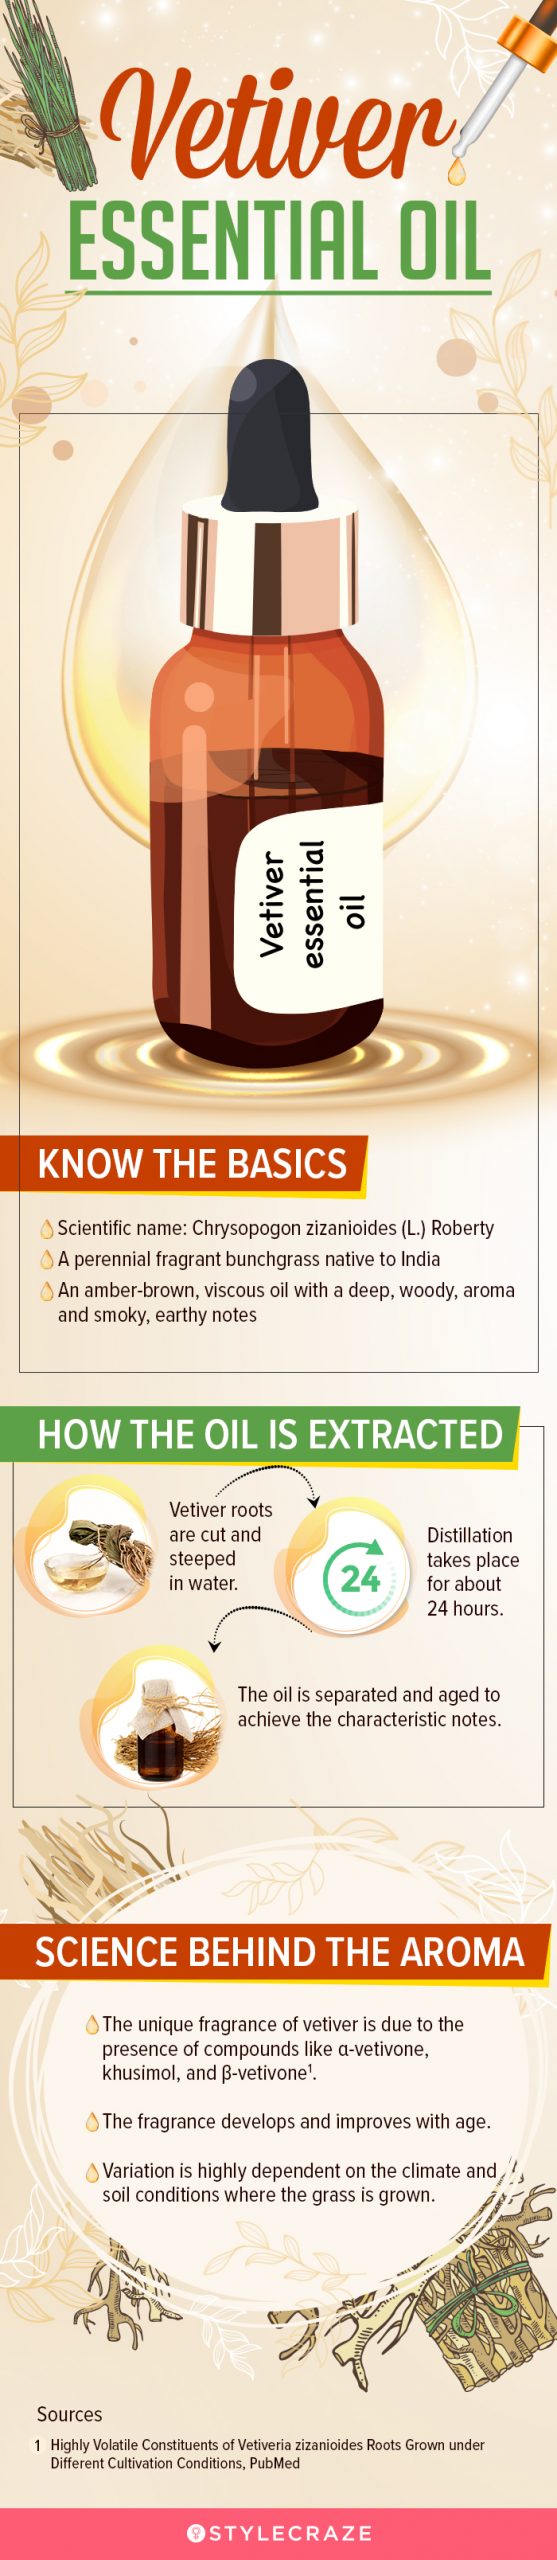 vetiver essential oil [infographic]